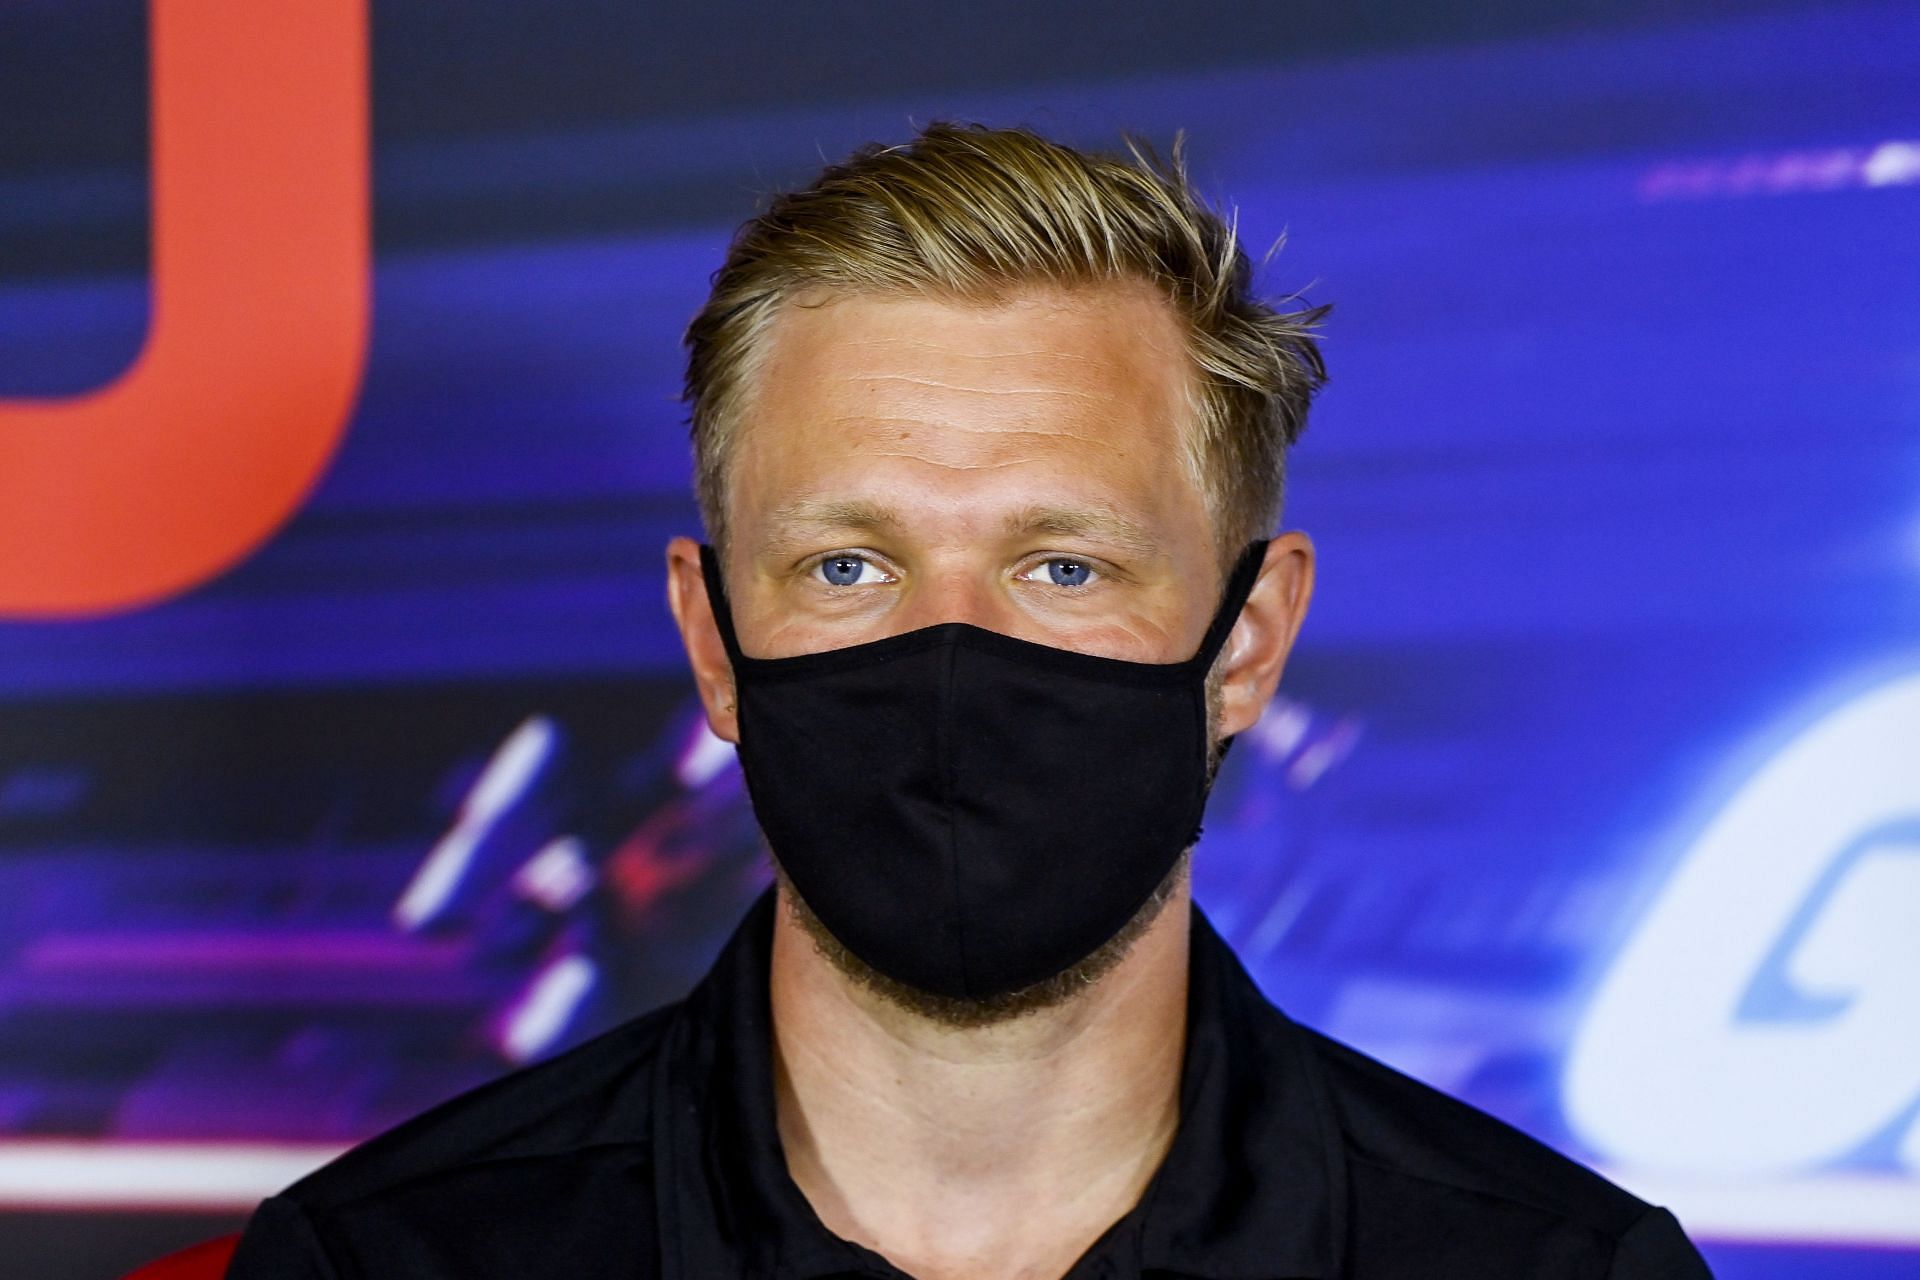 Kevin Magnussen is set to make an F1 return with Haas for the 2022 season (Photo by Mark Sutton - Pool/Getty Images)